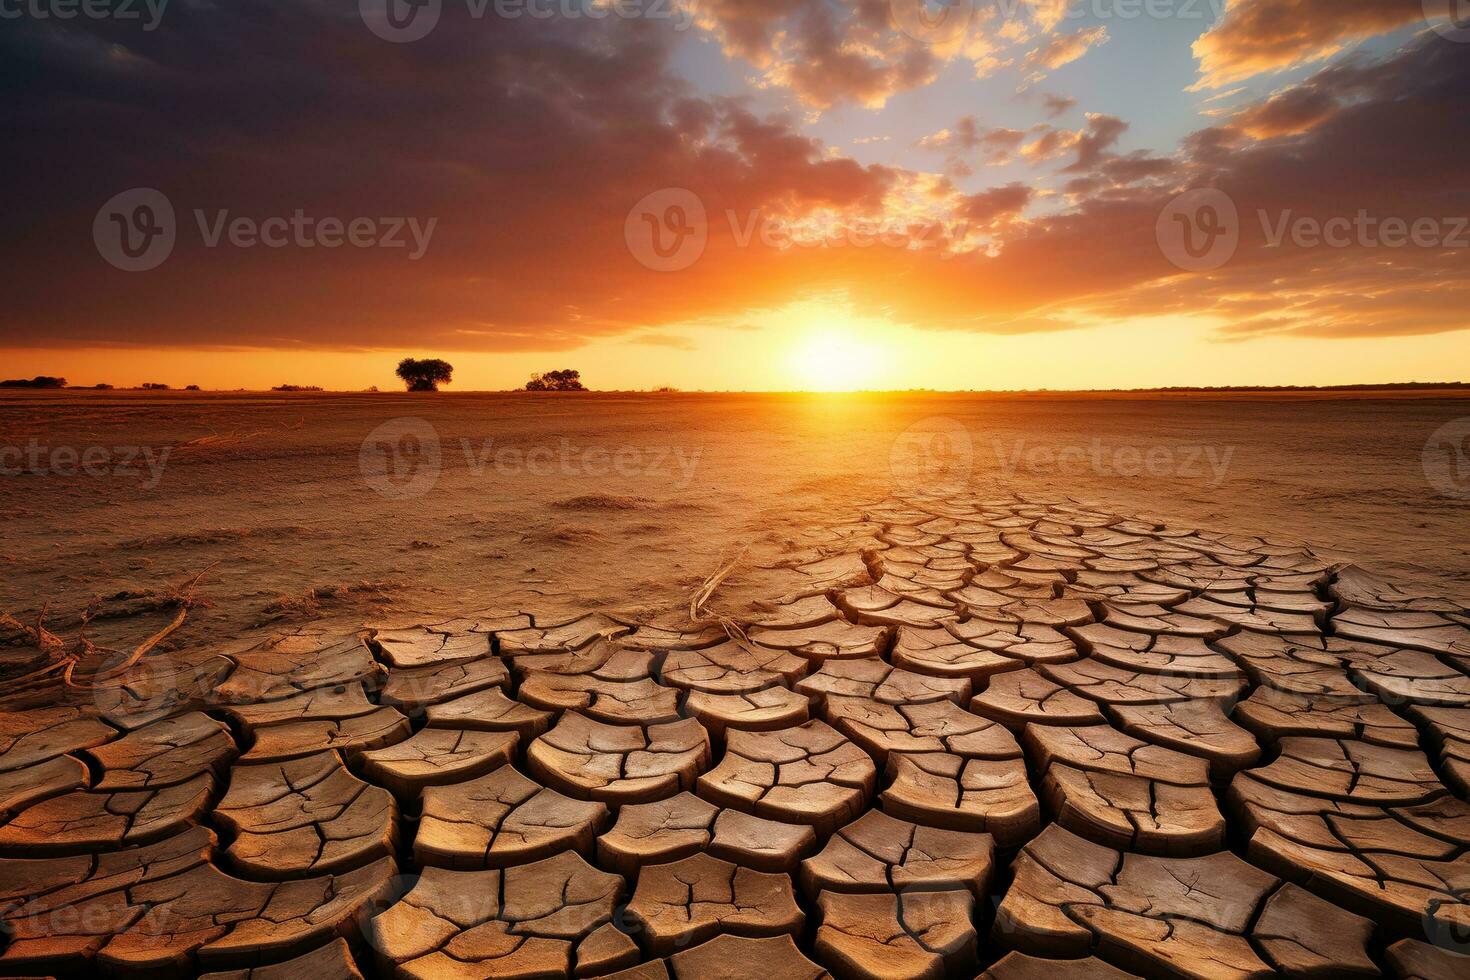 Stunning Sunset Over A Dried Out Field The Golden Sun Casts A Warm Glow Over The Cracked Earth